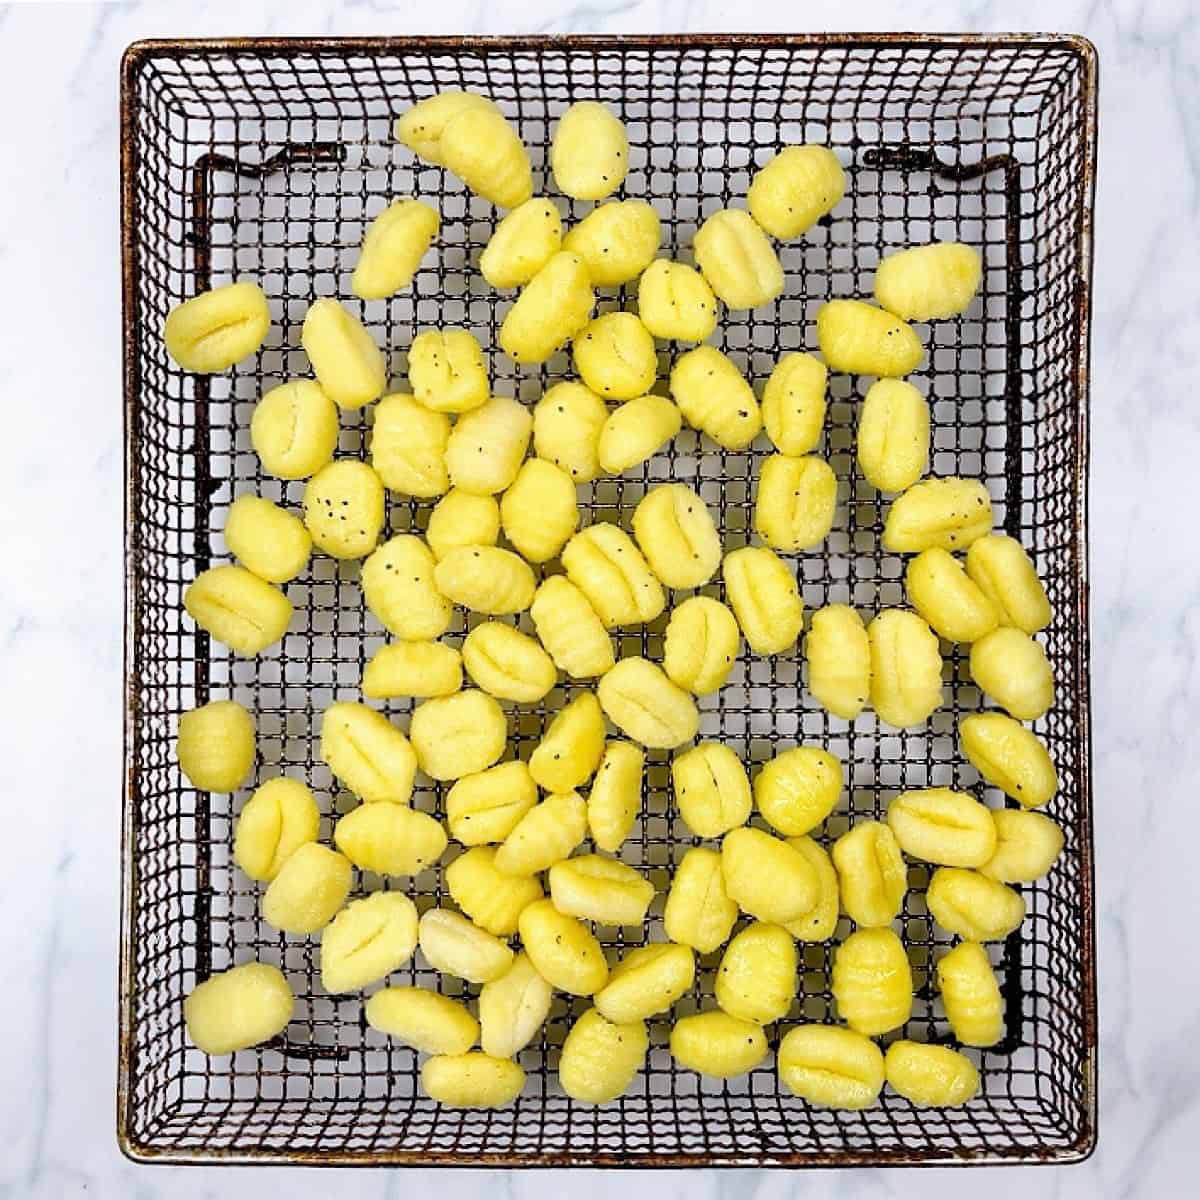 Gnocchi spread out on air fryer pan